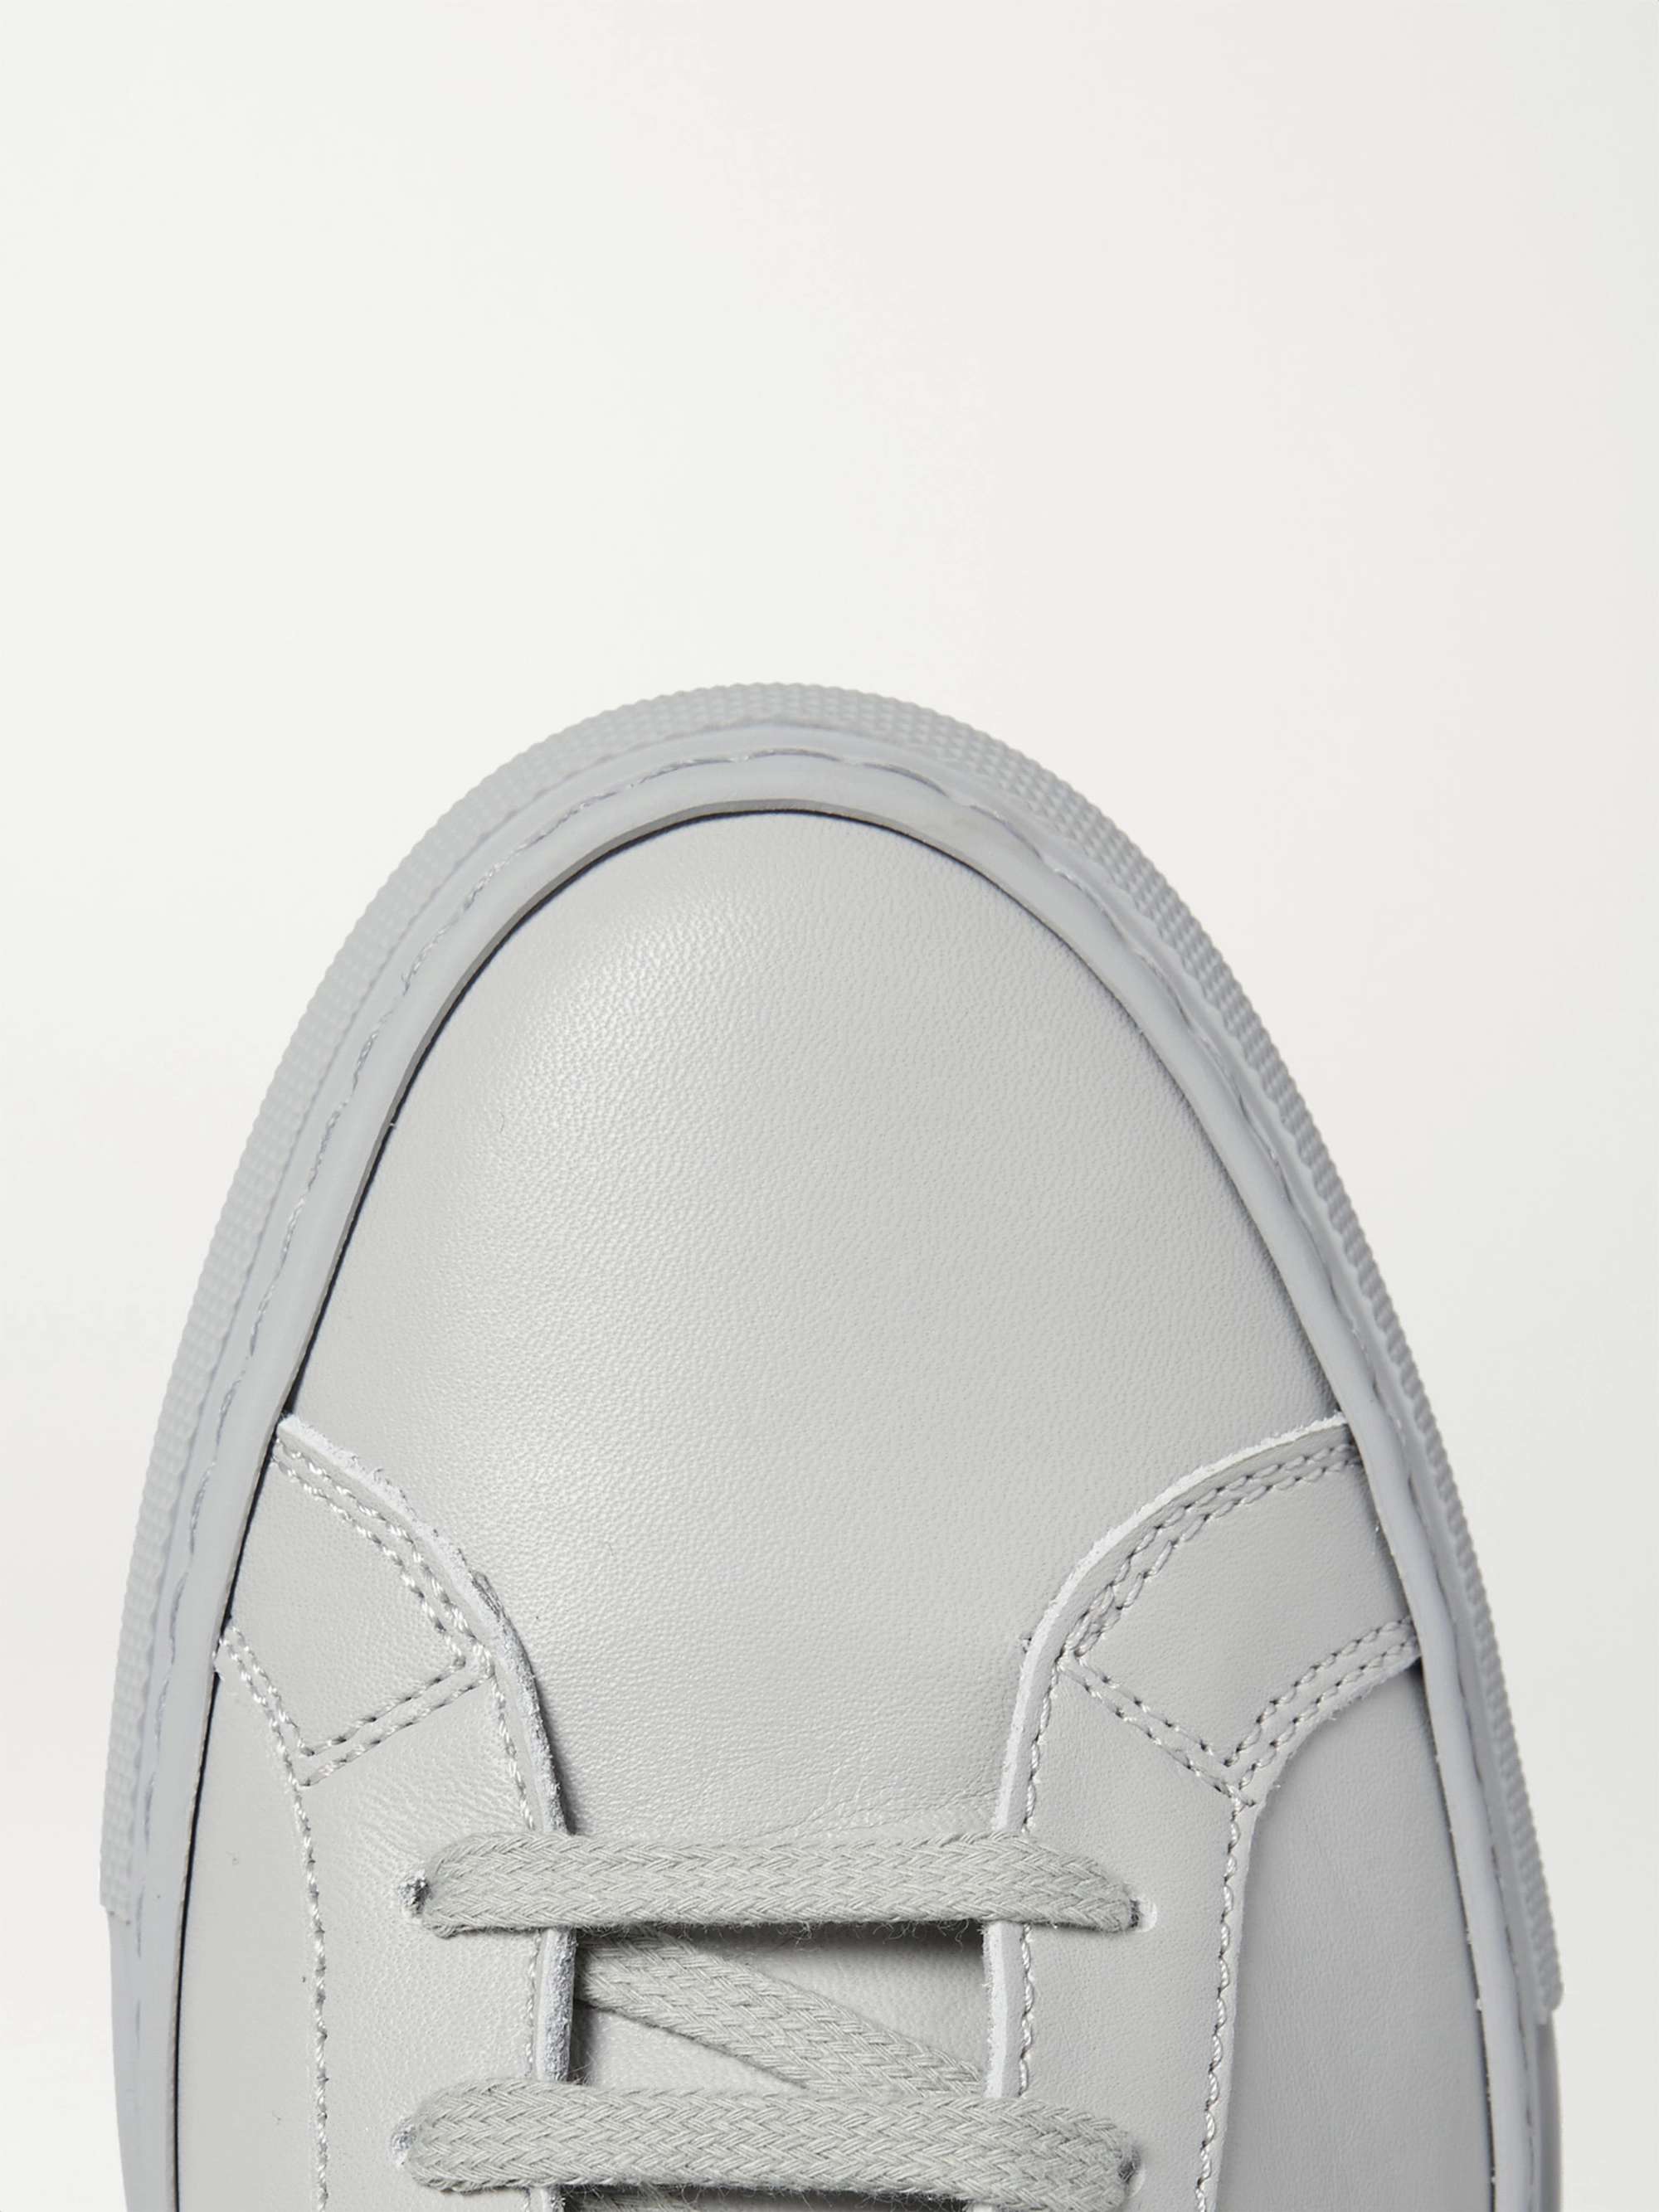 COMMON PROJECTS Original Achilles Leather Sneakers